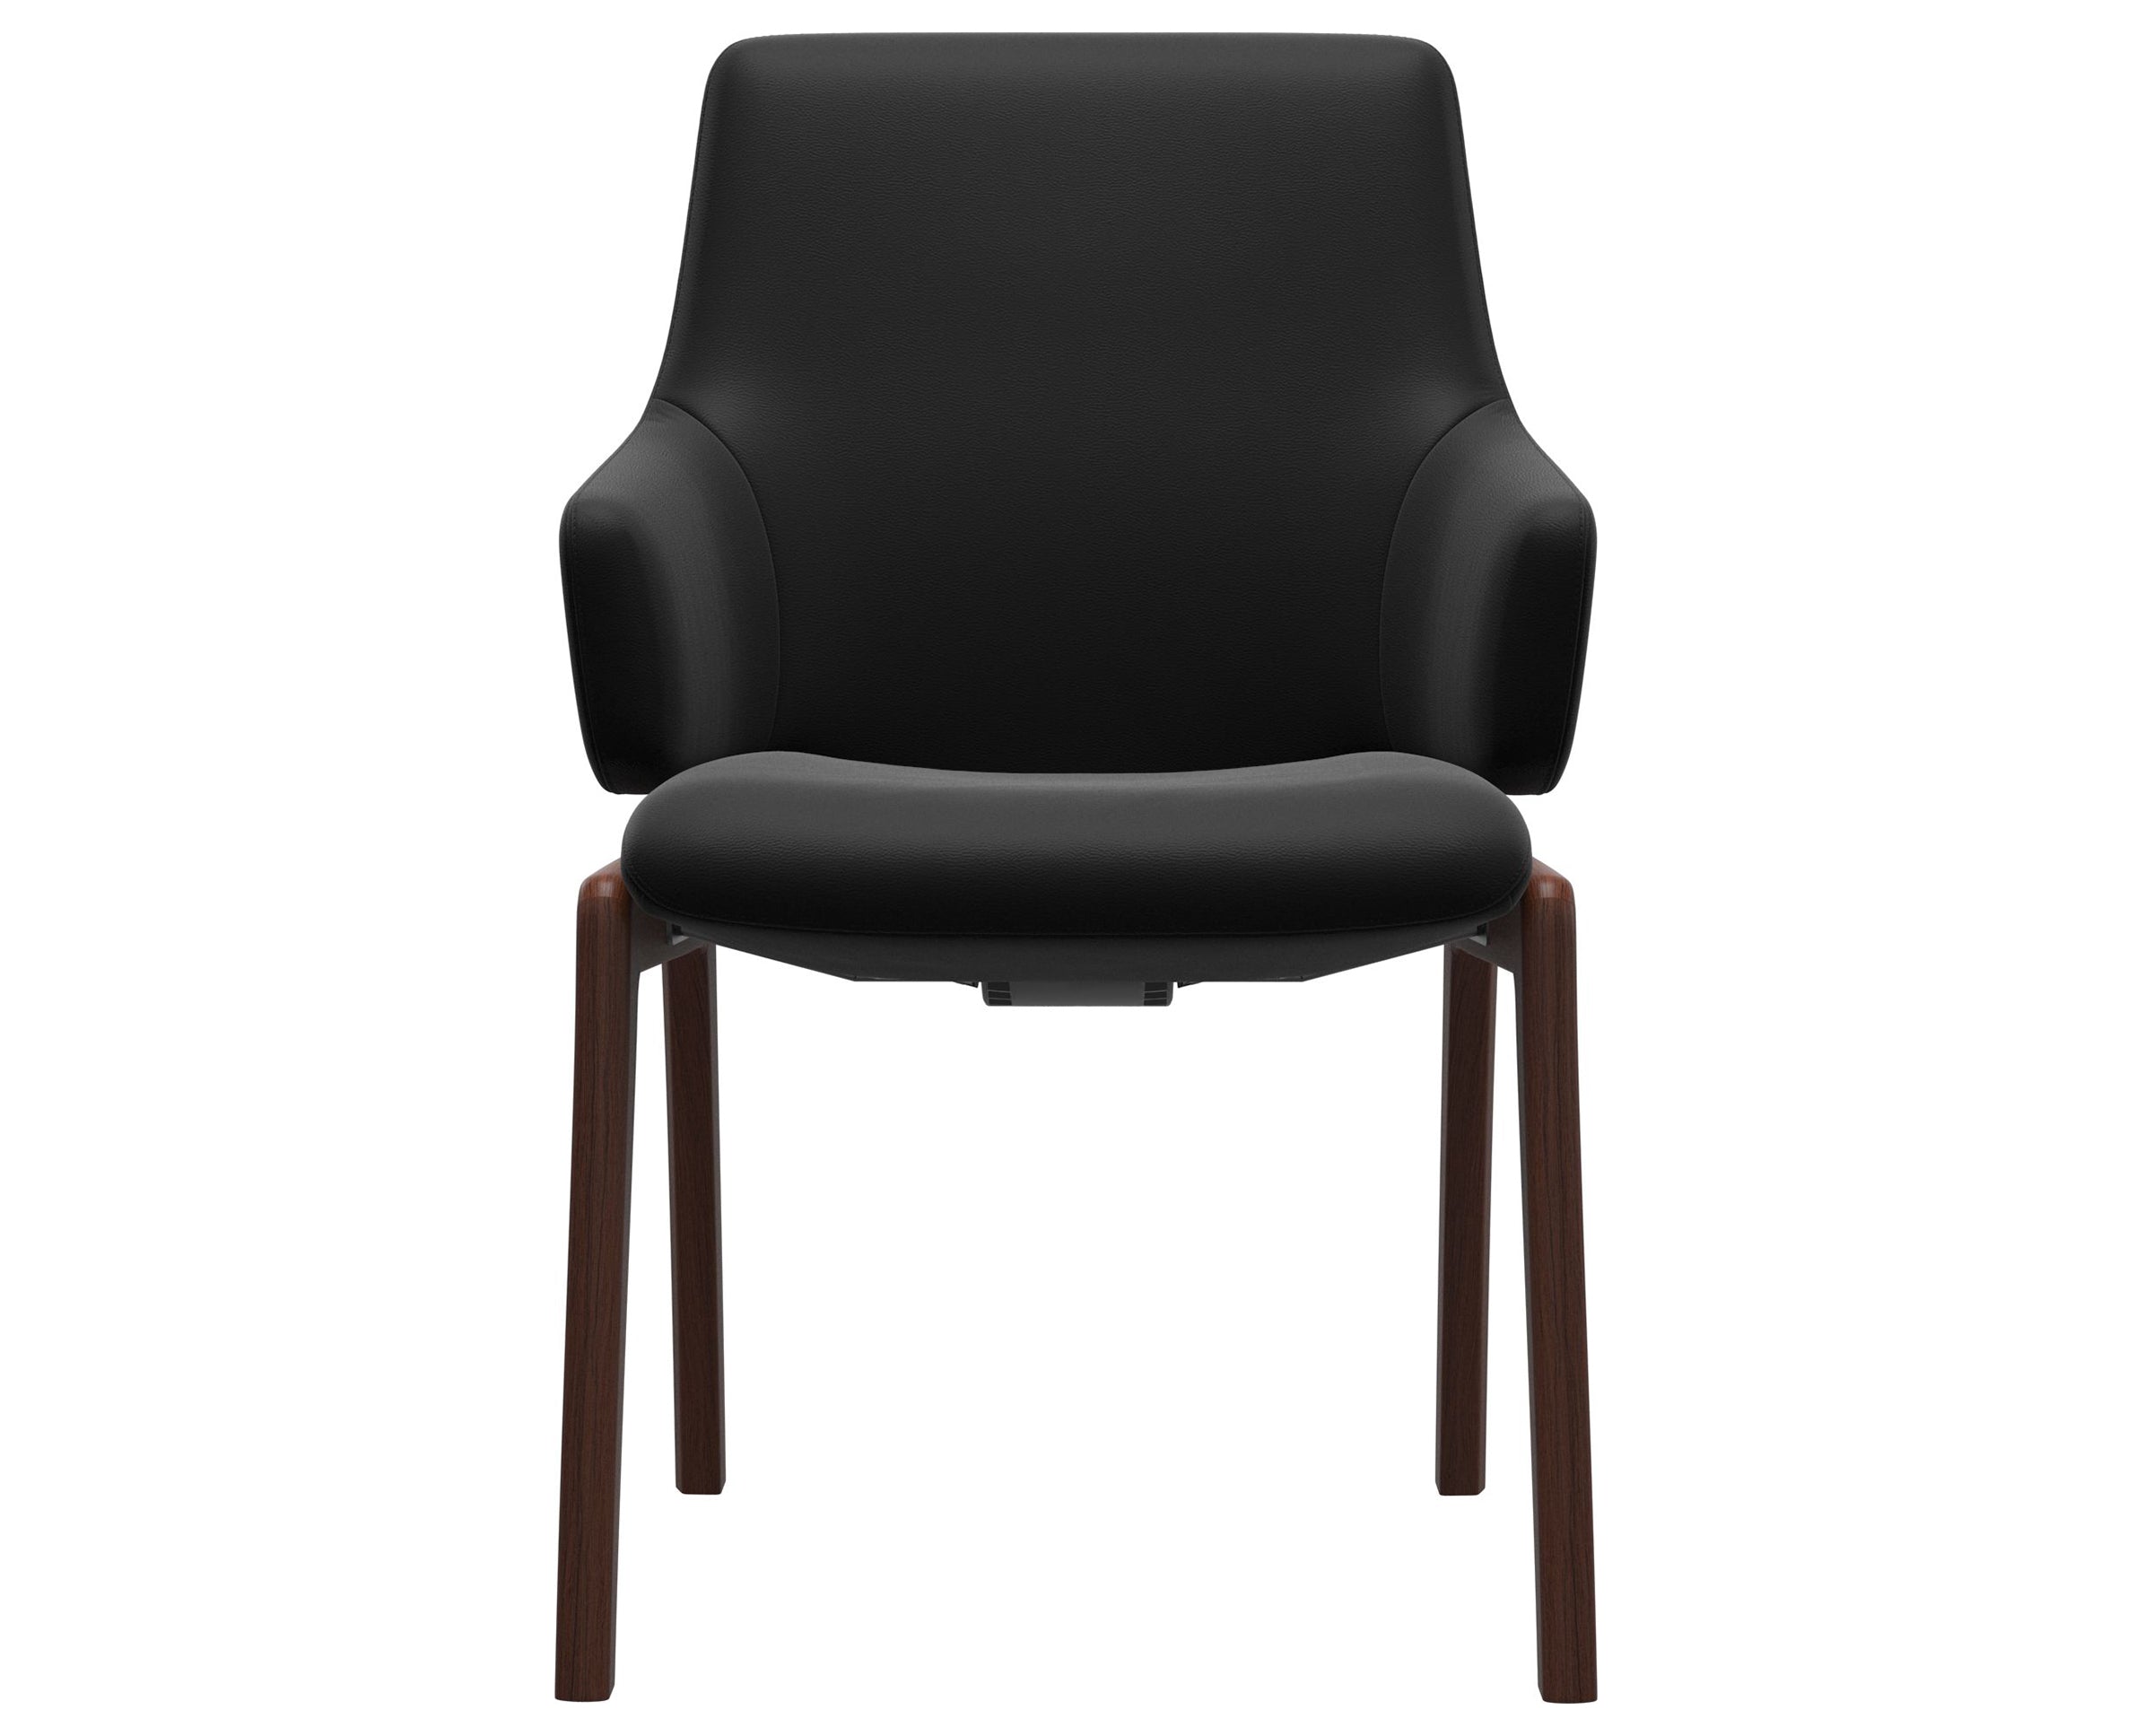 Paloma Leather Black and Walnut Base | Stressless Laurel Low Back D100 Dining Chair w/Arms | Valley Ridge Furniture